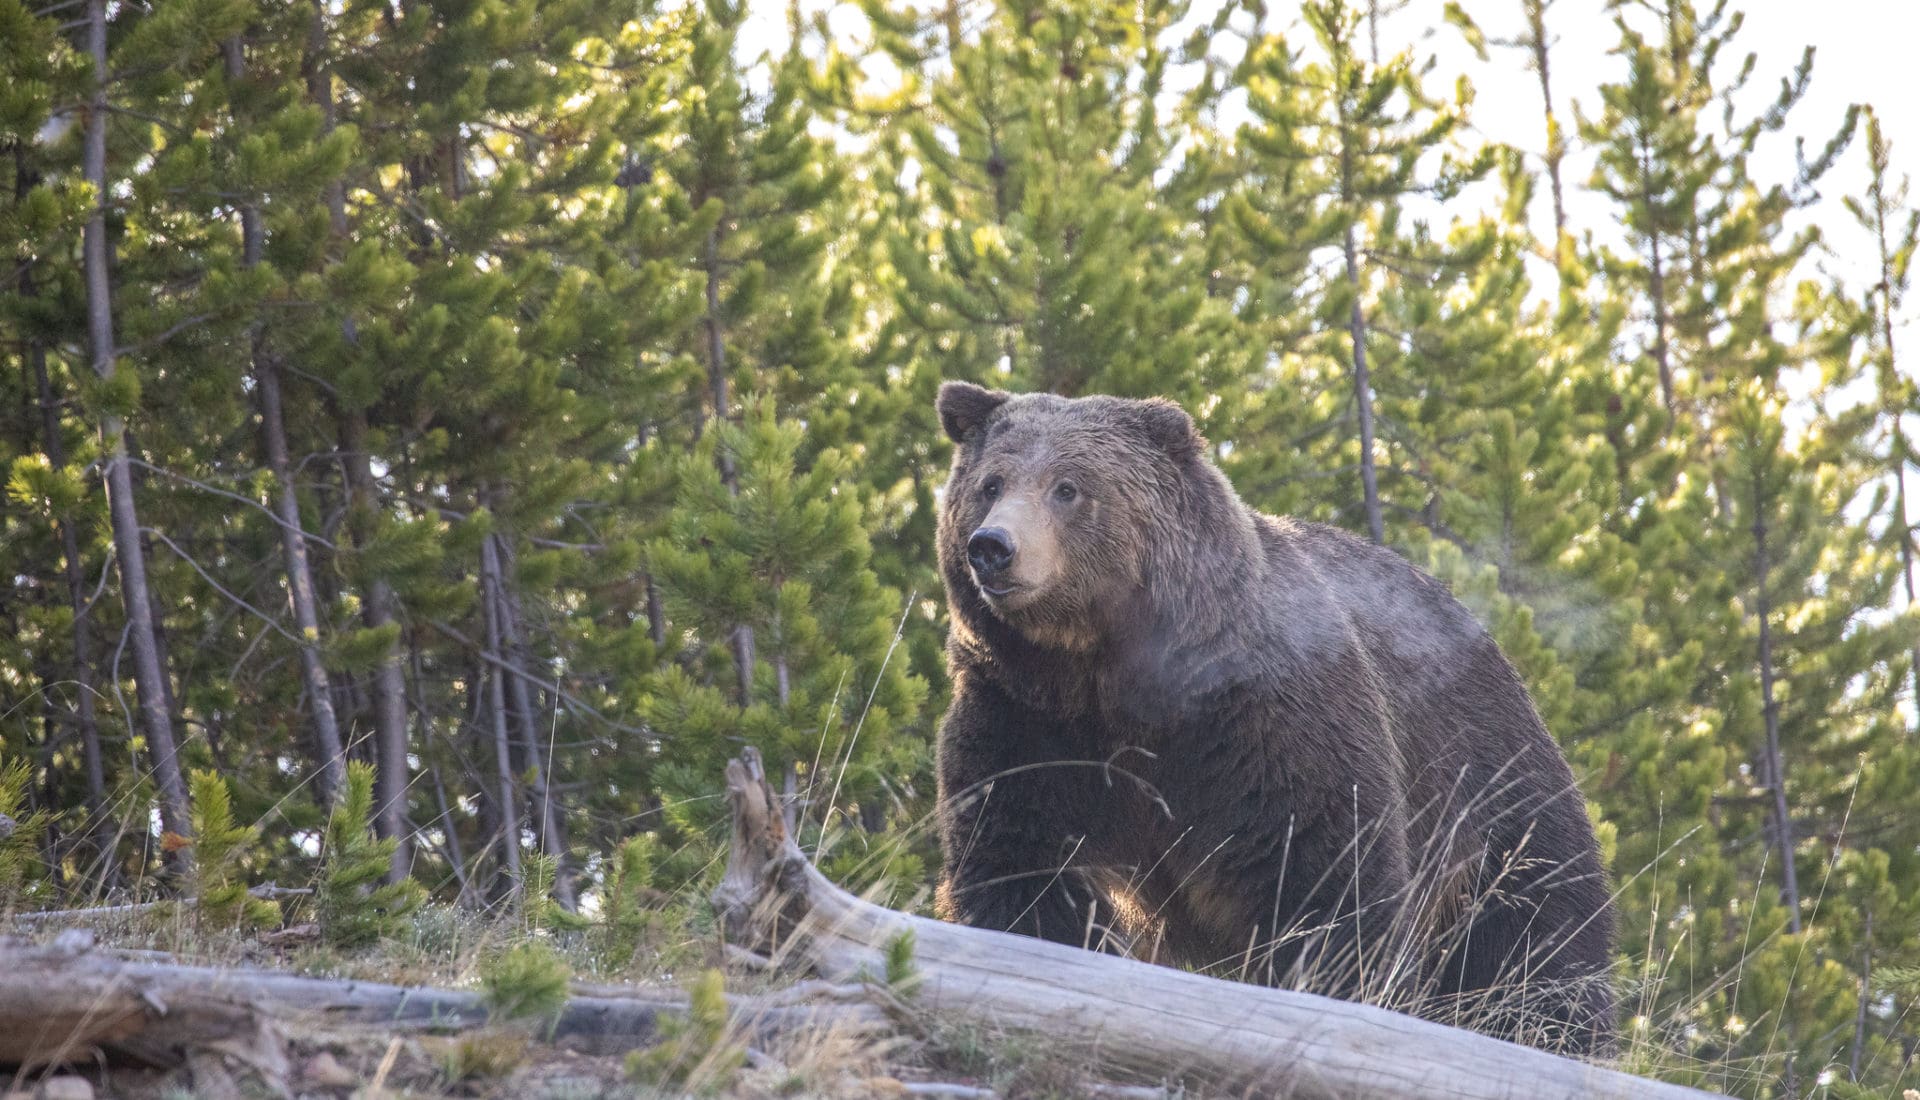 A grizzly bear in Yellowstone National Park